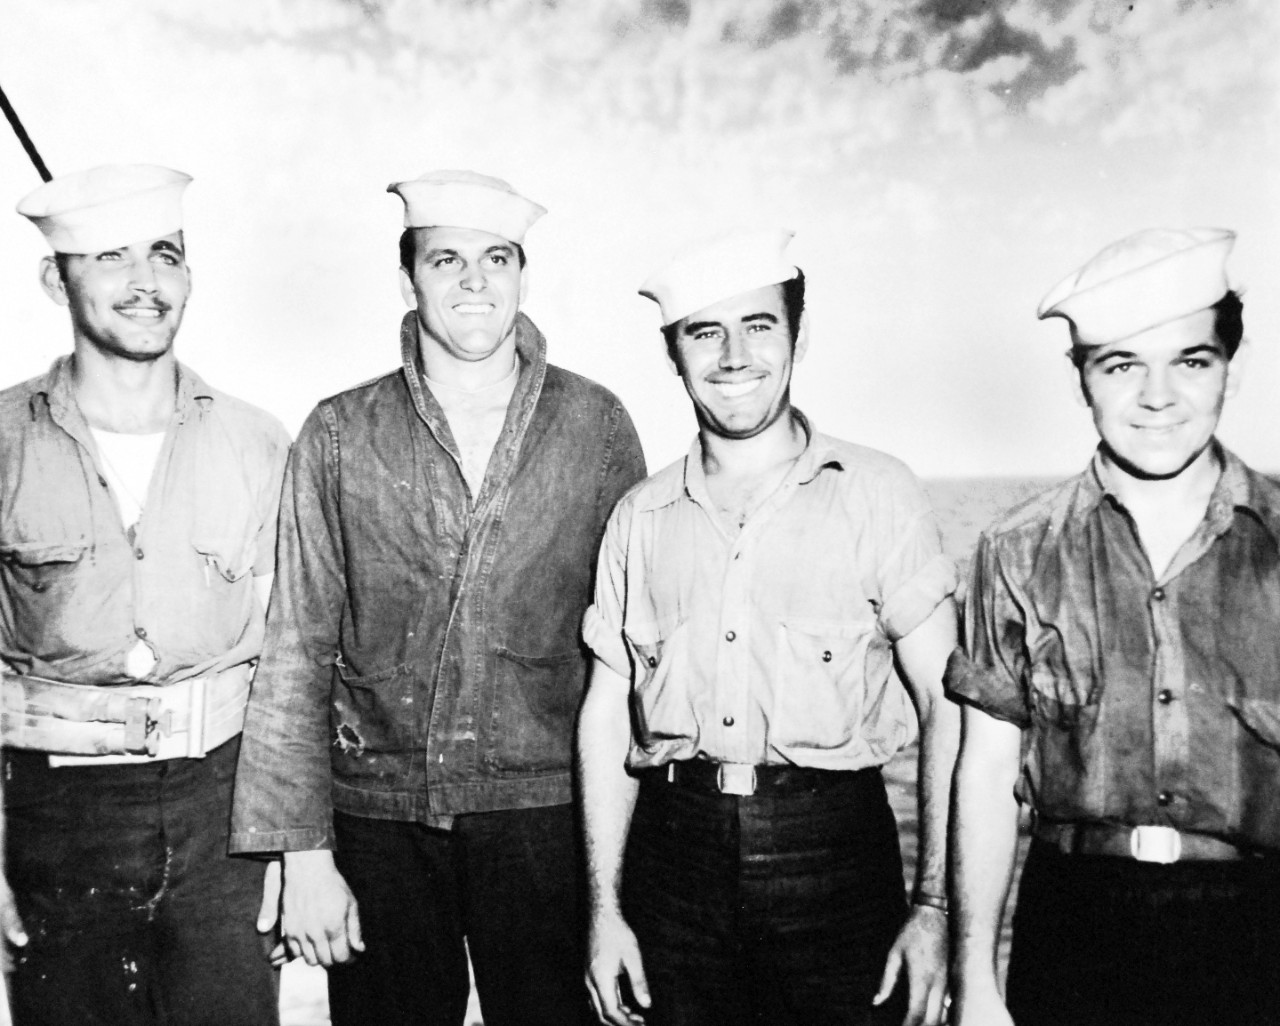 26-G-2047:  Operation Avalanche,  September 1943.  They Helped Push the Nazis Back.  These four crew members of a tank lighter attached to a U.S. Coast Guard manned transport helped push the Germans back from the beaches at Paestum, near Salerno.  Manning a 50 caliber machine gun, Coast Guardsman Richard Cook, second from left, during the lighter’s first trip to the beach successfully broke up a Nazi machine gun nest.  From left to right:  Coast  Guardsman Leonard Ruehle; Coast Guardsman Cook; US Navy sailor A.E. Lessard; and US Navy sailor Harry W. Lesson.    Official U.S. Coast Guard Photograph, now in the collections of the National Archives.   (2015/5/19). 